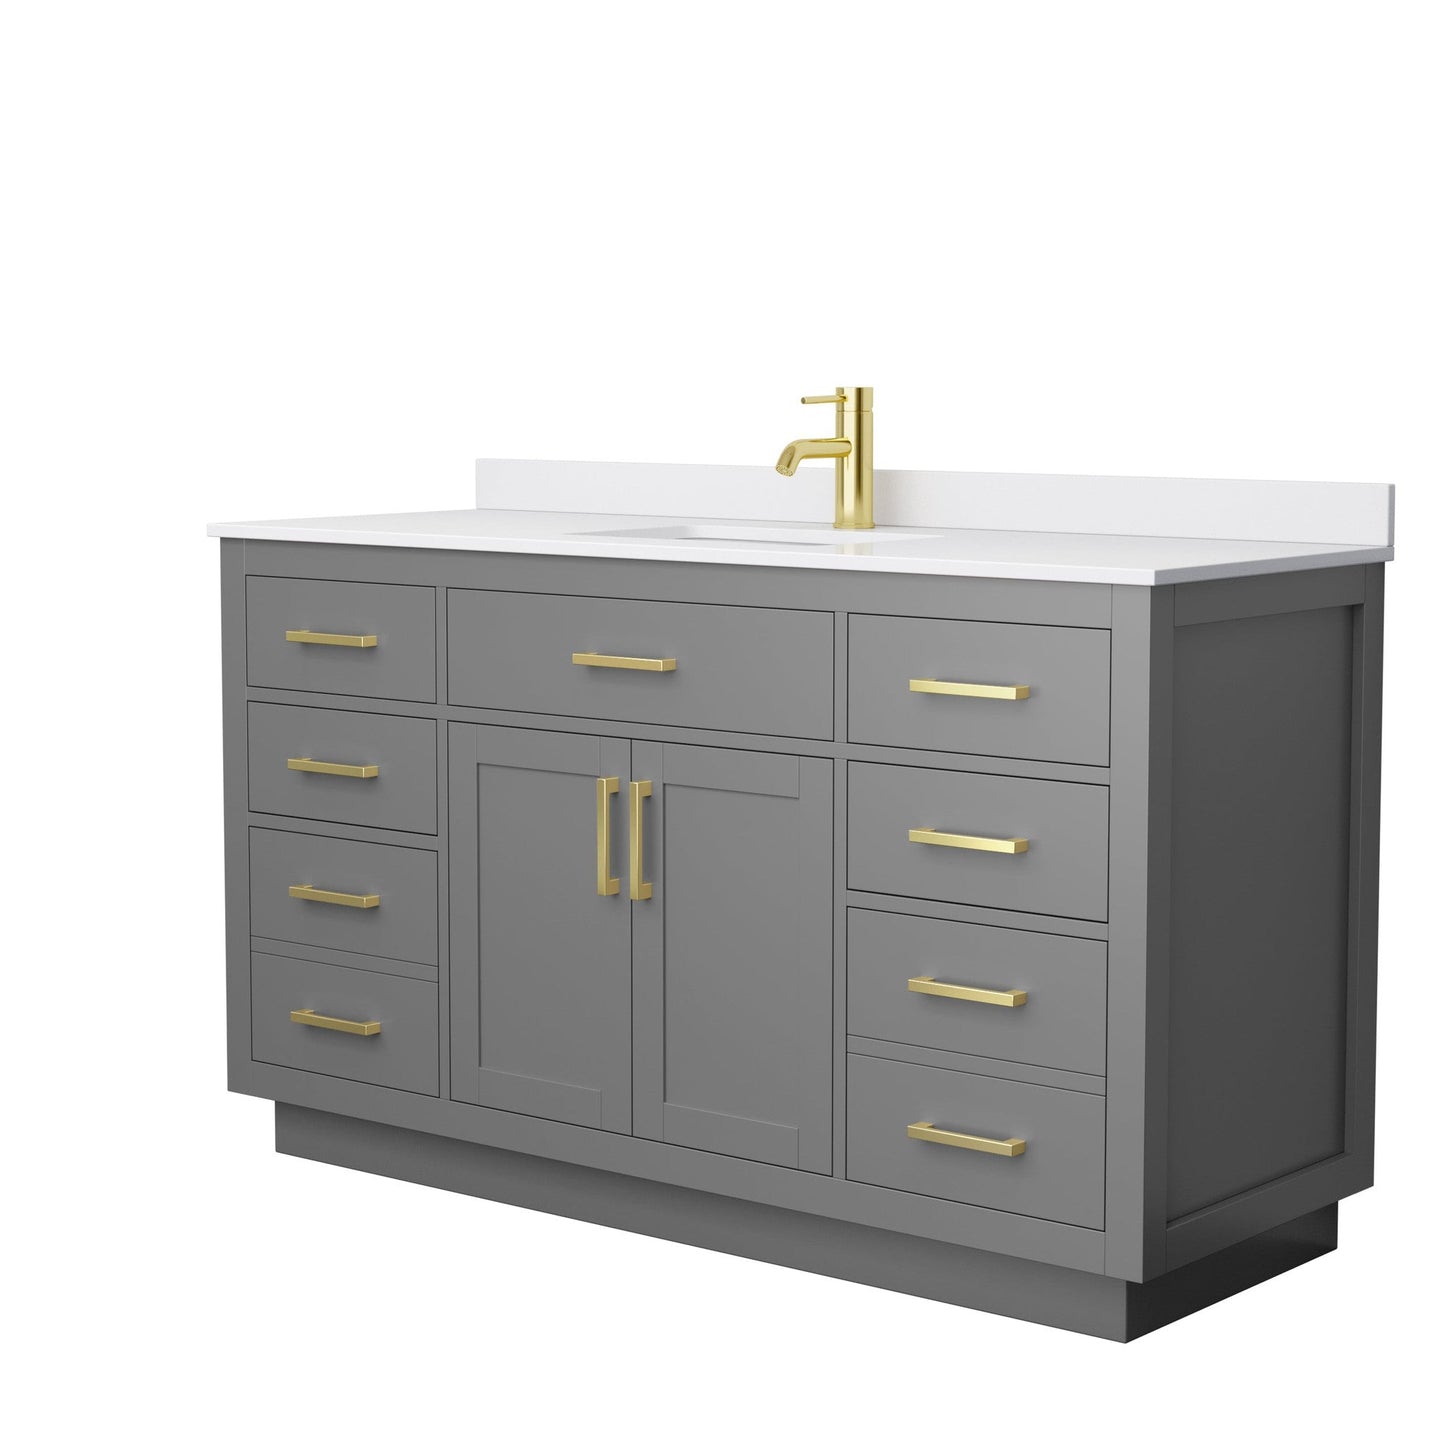 Beckett 60" Single Bathroom Vanity With Toe Kick in Dark Gray, White Cultured Marble Countertop, Undermount Square Sink, Brushed Gold Trim